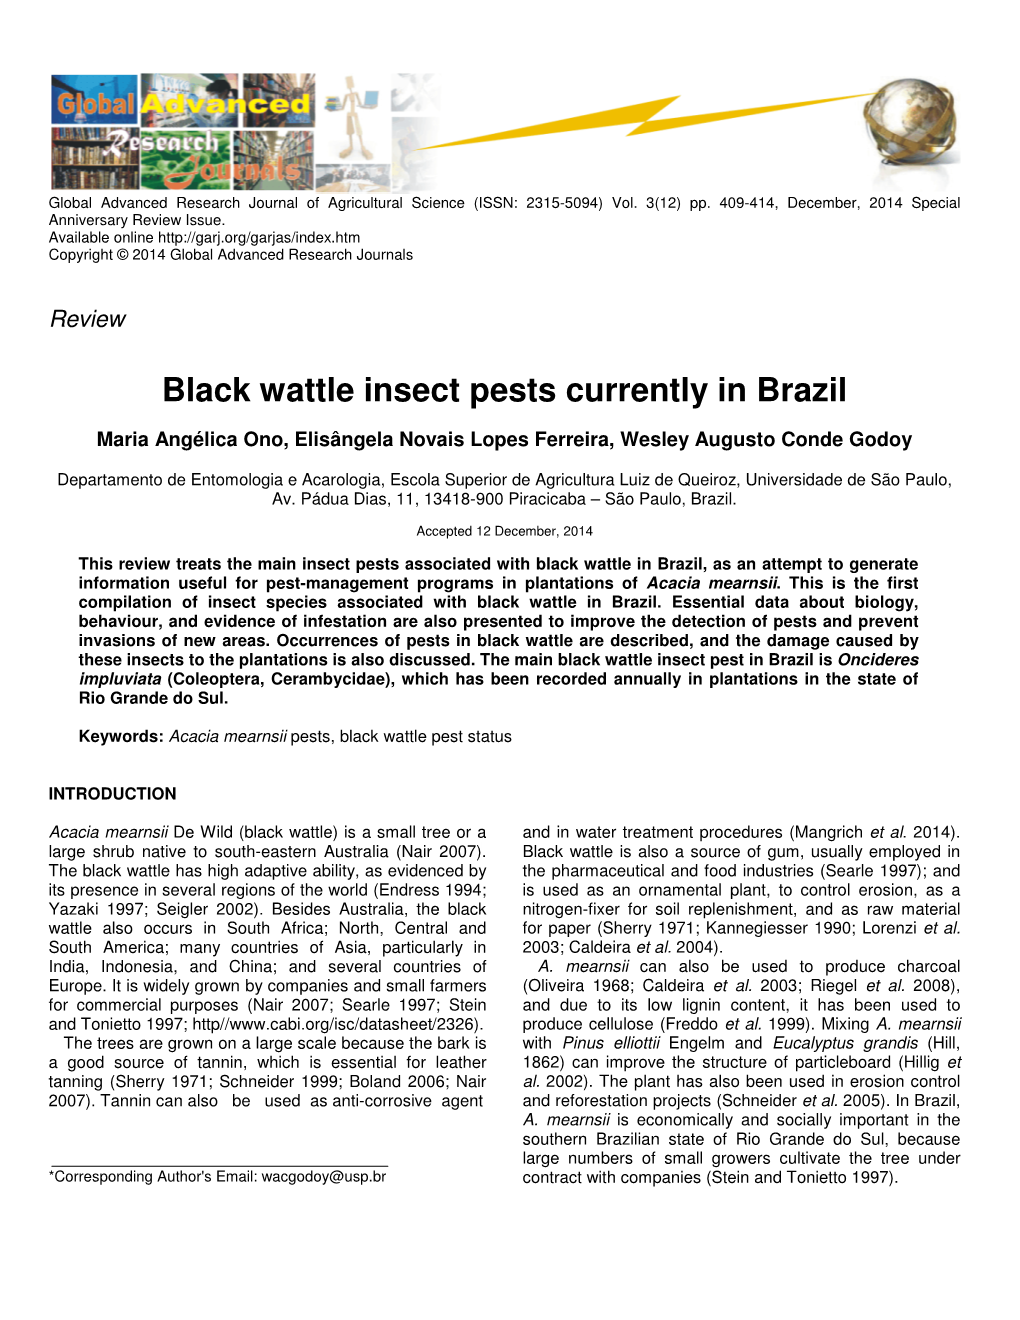 Black Wattle Insect Pests Currently in Brazil